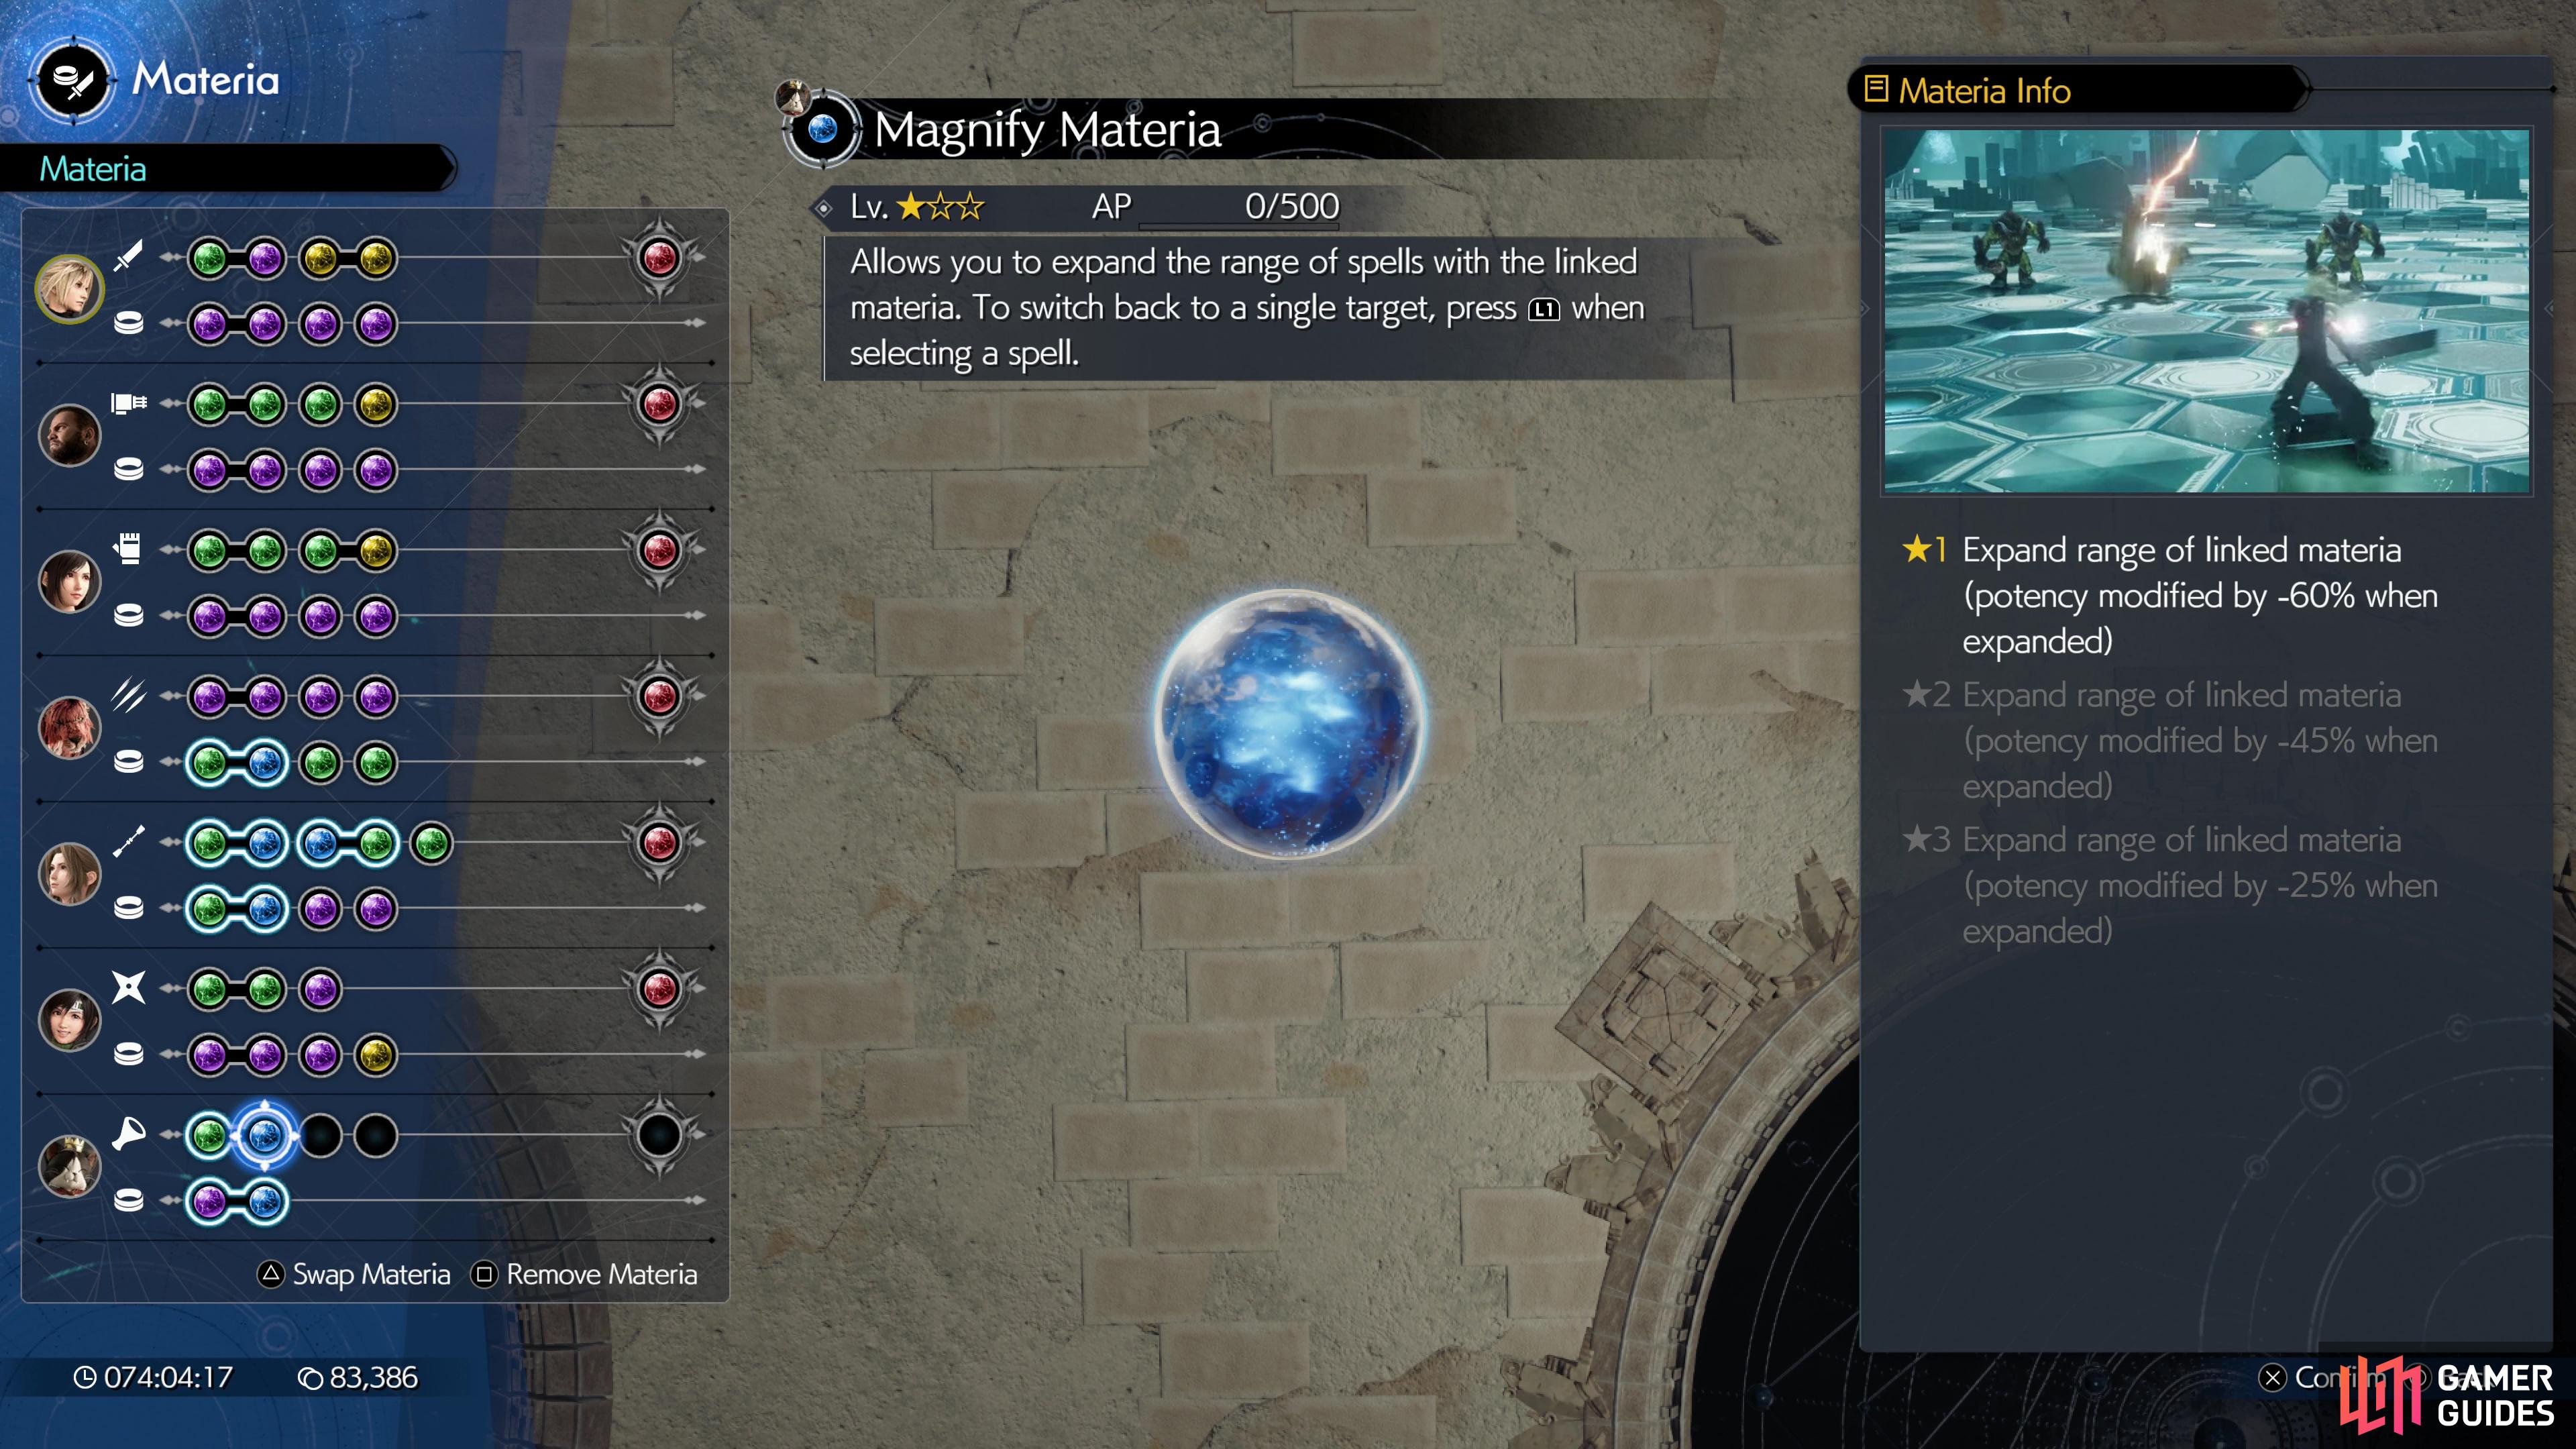 There are three orbs of Magnify Materia in the game, but only two can be used in the main questline. The first keeper comes equipped on Cait Sith when he joins your party in Chapter 9.